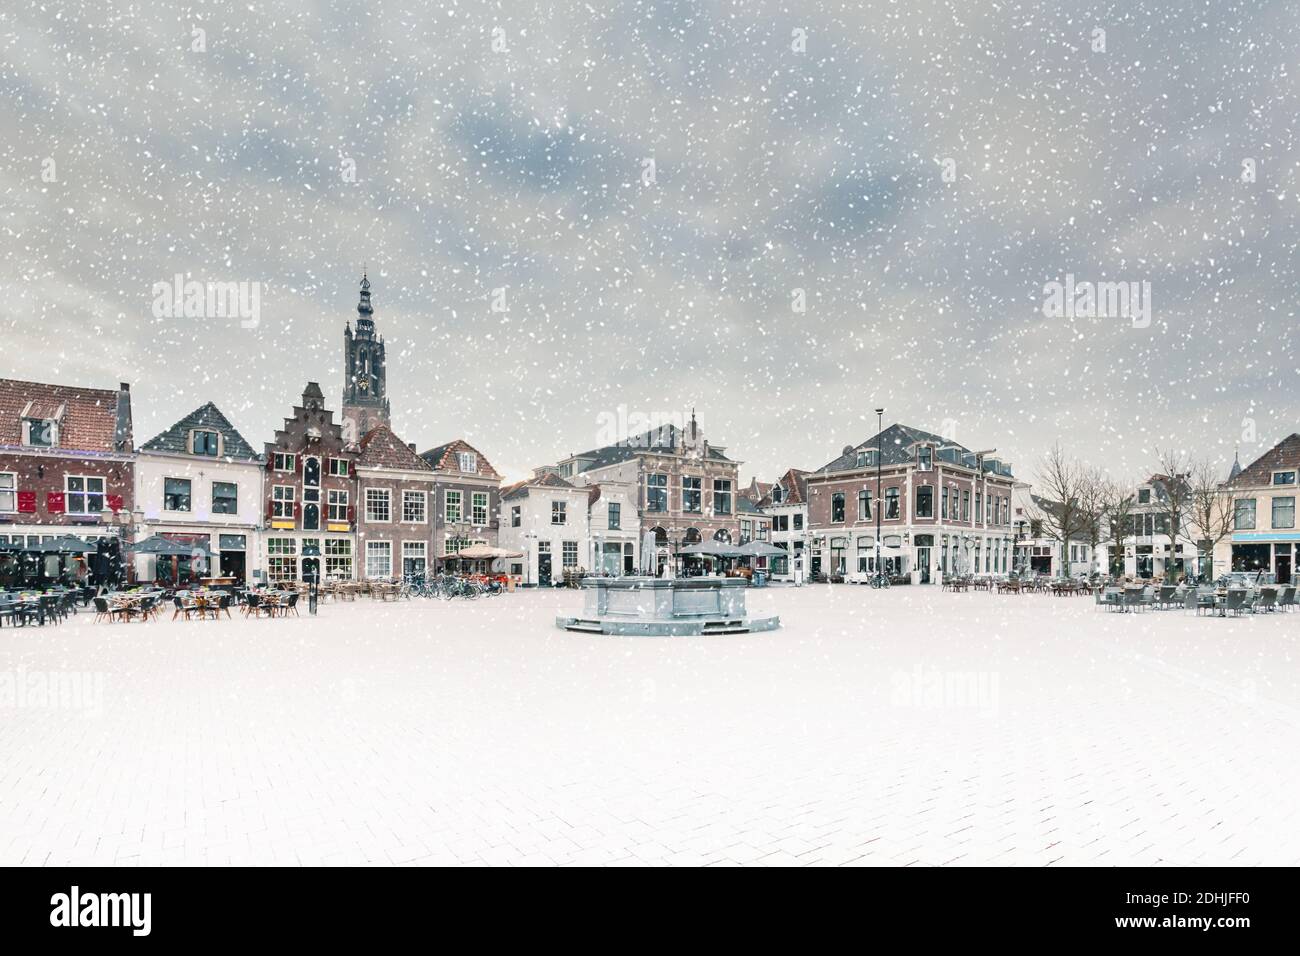 Winter view of the central square with ancient buildings during snowfall in the Dutch city of Amersfoort, The Netherlands Stock Photo